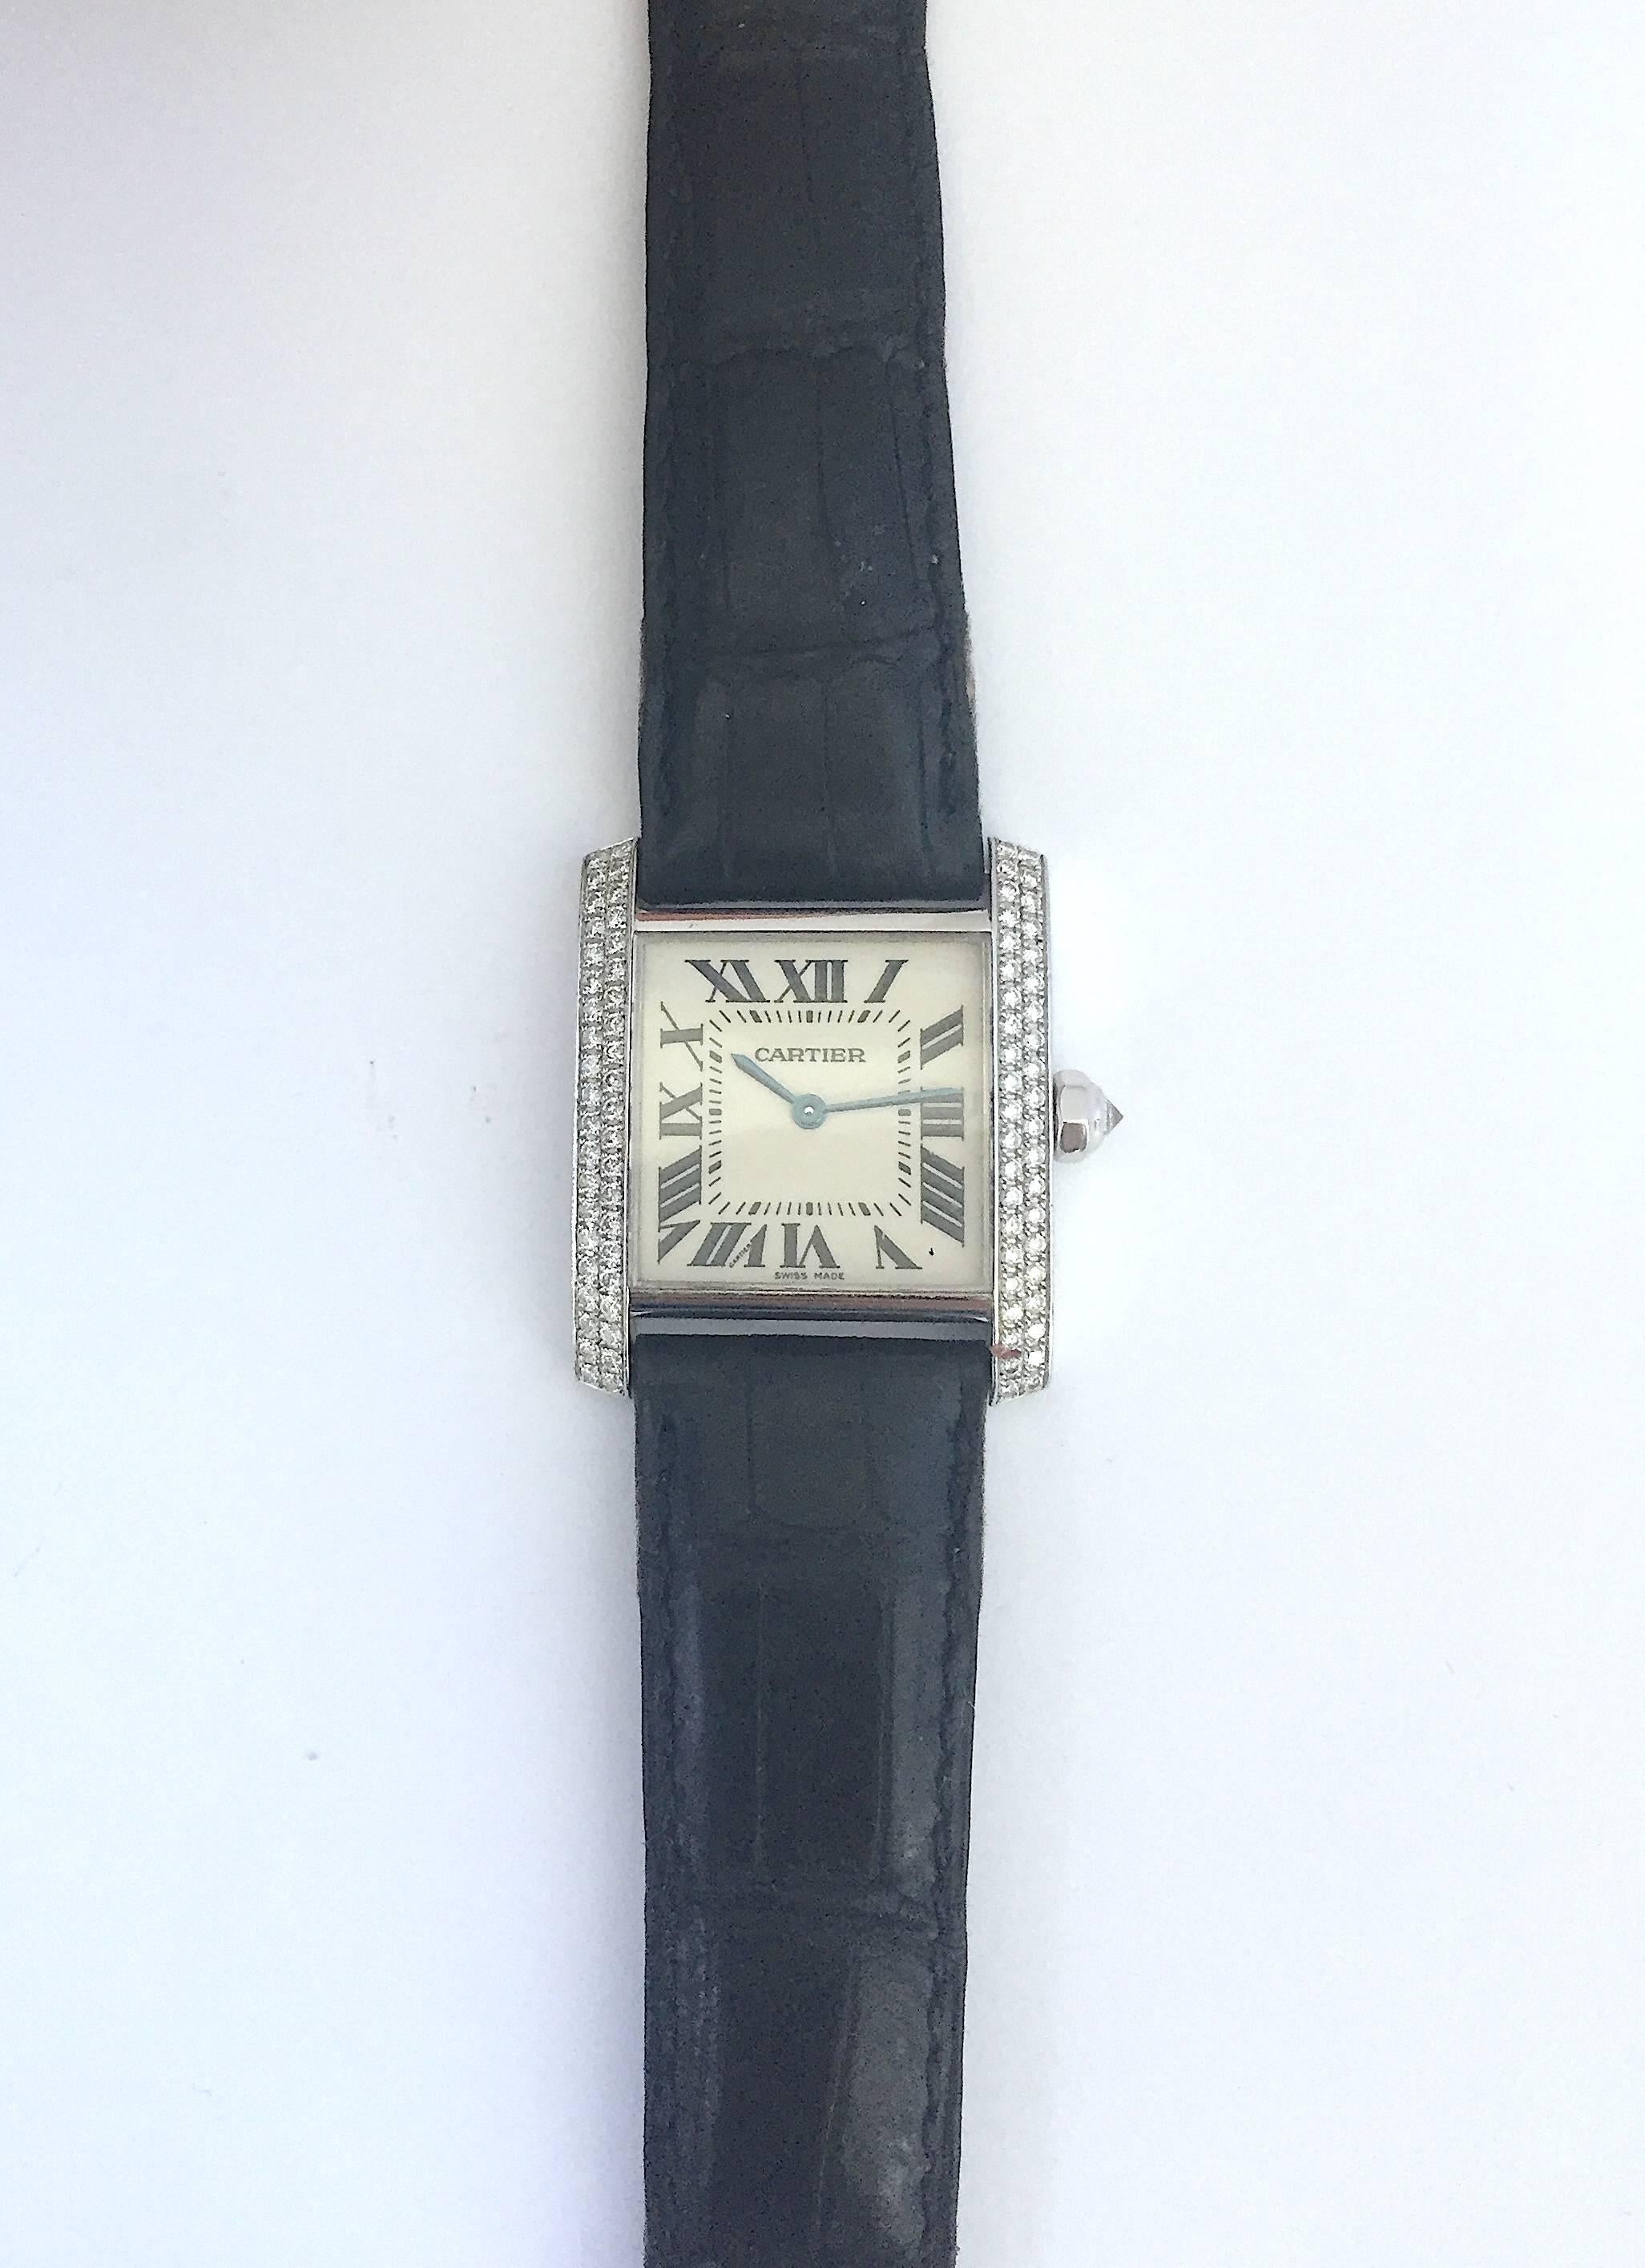 Cartier 18K White Gold Ladies Tank Quartz Watch
Classic Cartier Tank Design with Roman Numeral Markers 
White Colored Dial with Cartier Blue Hands 
Cartier Cabochon Diamond Crown 
Sapphire Crystal 
Quartz Movement 
Factory Diamond Bezel
Comes Fitted